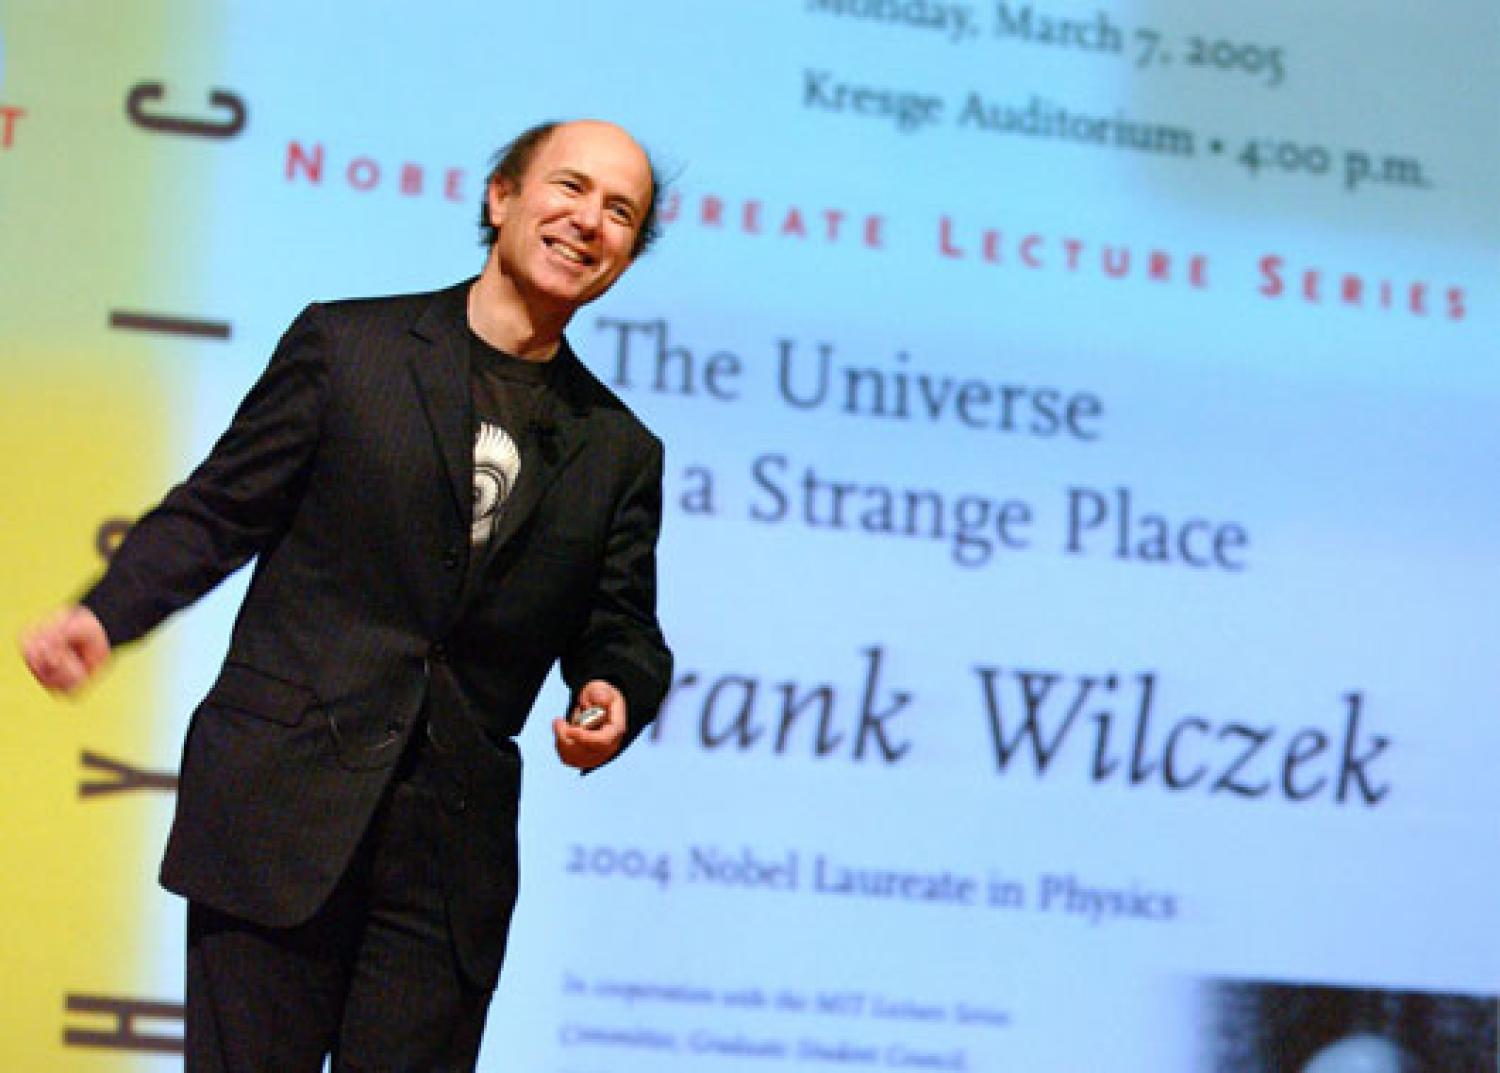 Frank Wilczek, 2004 Nobel Laureate in Physics, is scheduled to give the 46th George Gamow Memorial Lecture at the University of Colorado Boulder on April 26.